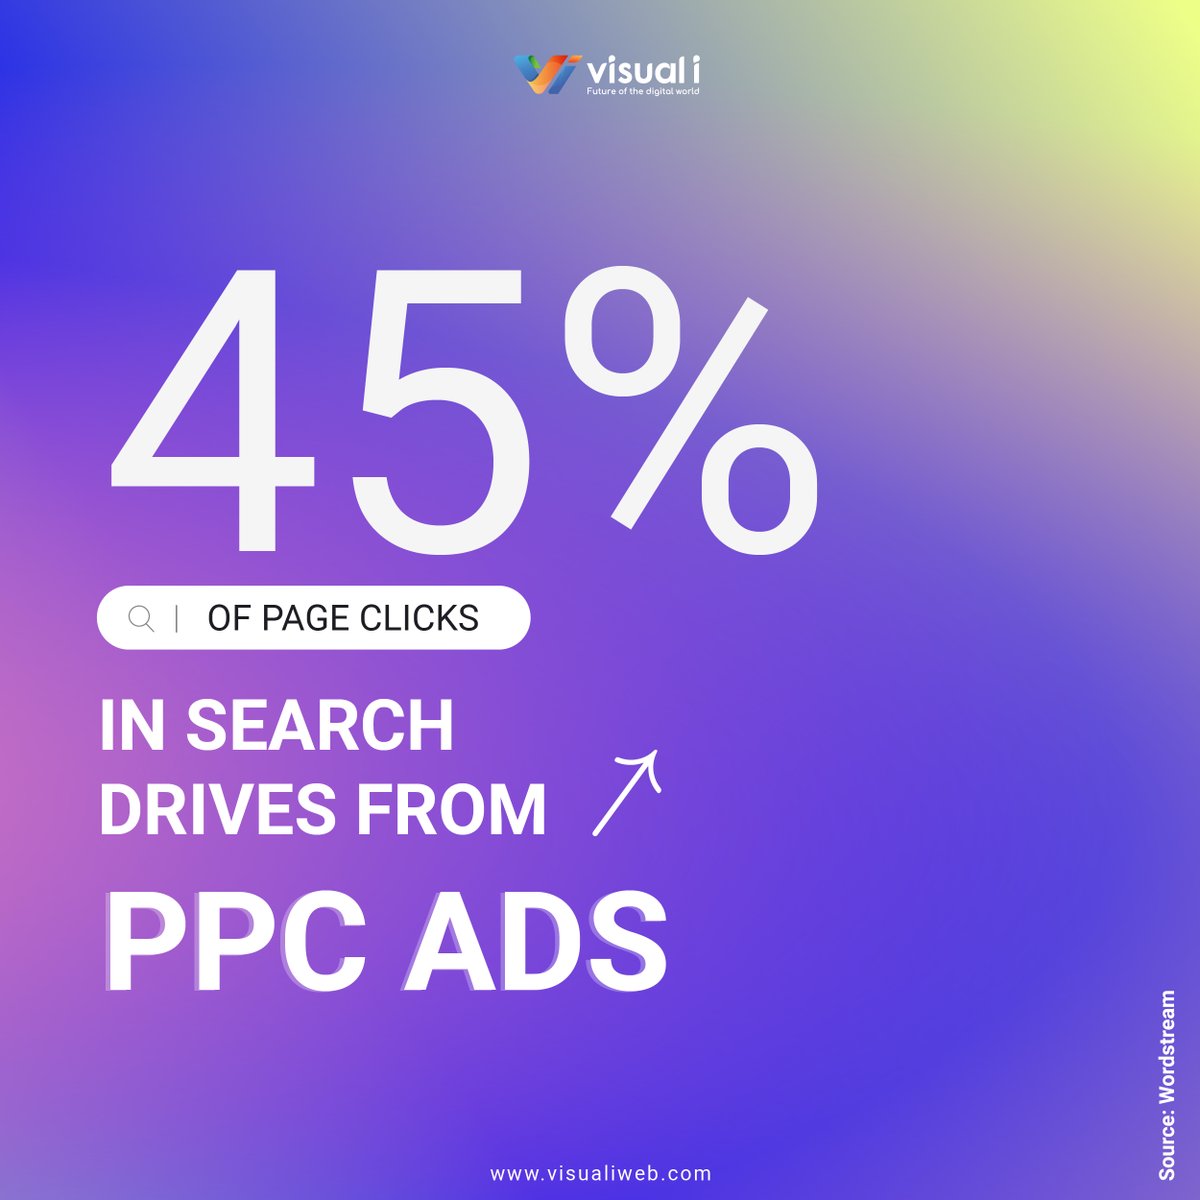 Pay-per-click (PPC) advertising accounts for almost half the page clicks in search results!

Visit our website:
visualiweb.com

#PPC #payperclick #paidadvertising #digitalmarketing #googleads #visuali
Source: WordStream